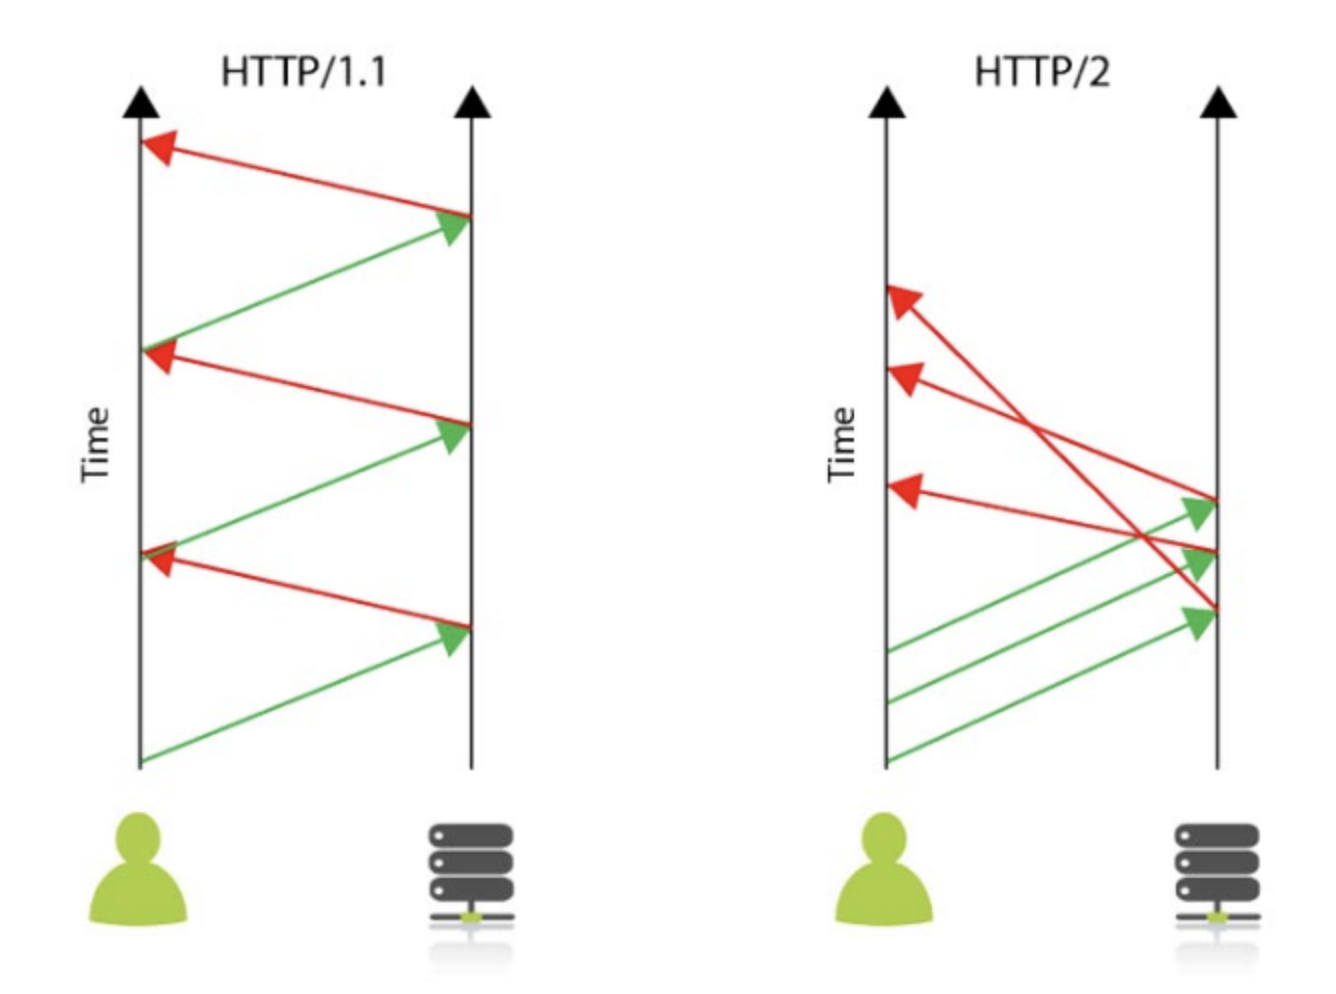 ../../_images/http-http2-flowdiagram.png